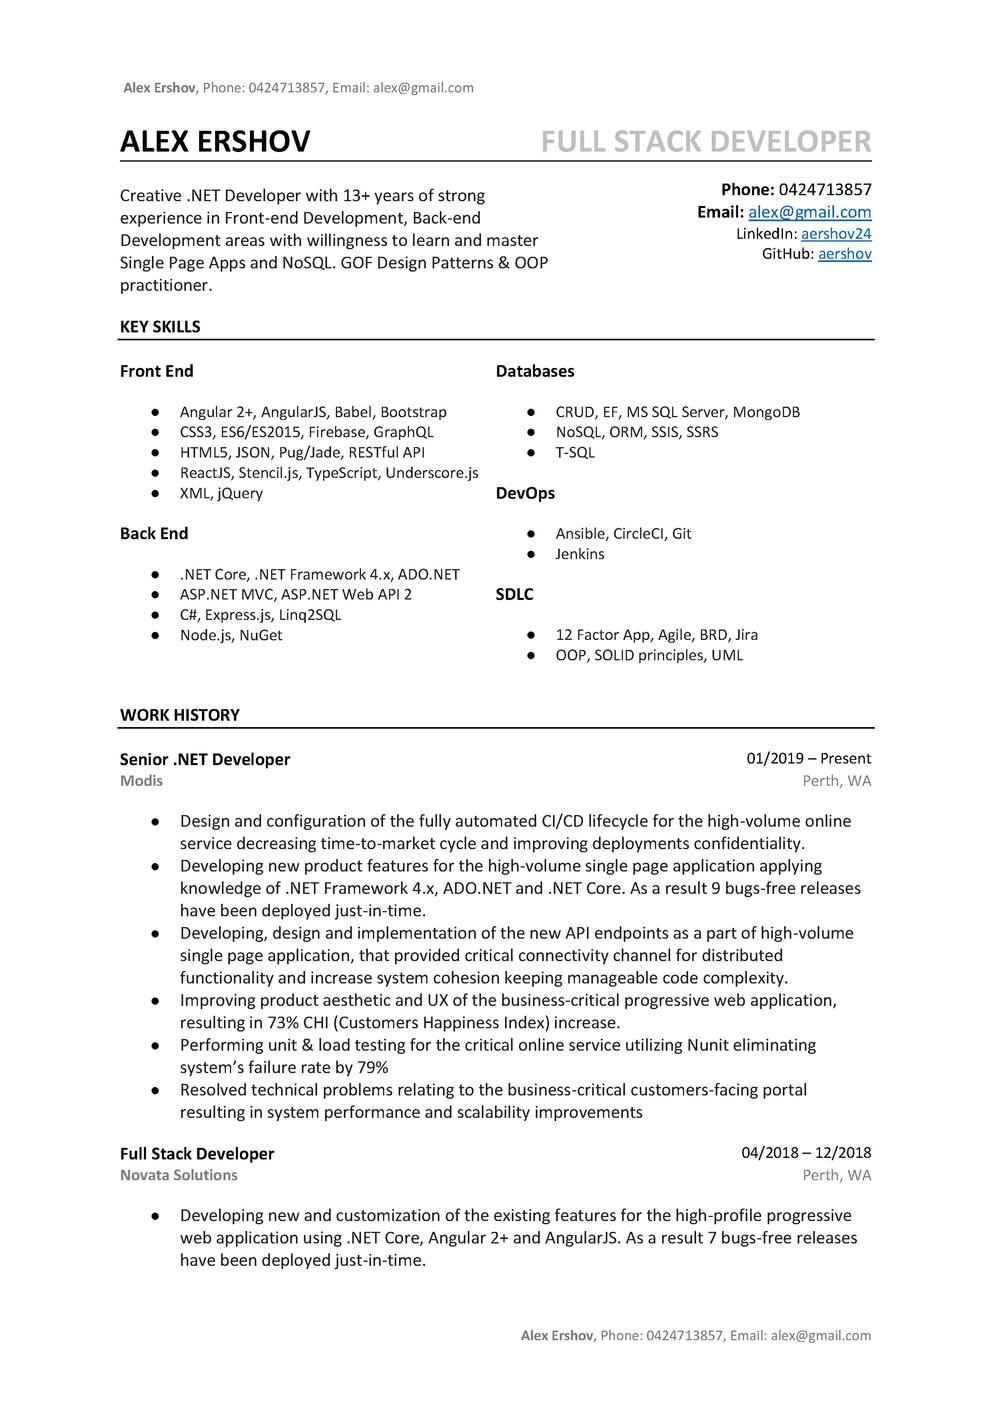 Sample Resume with Design Patterns and solid Principles Github – Aershov24/101-developer-resume-cv-templates: the Only …